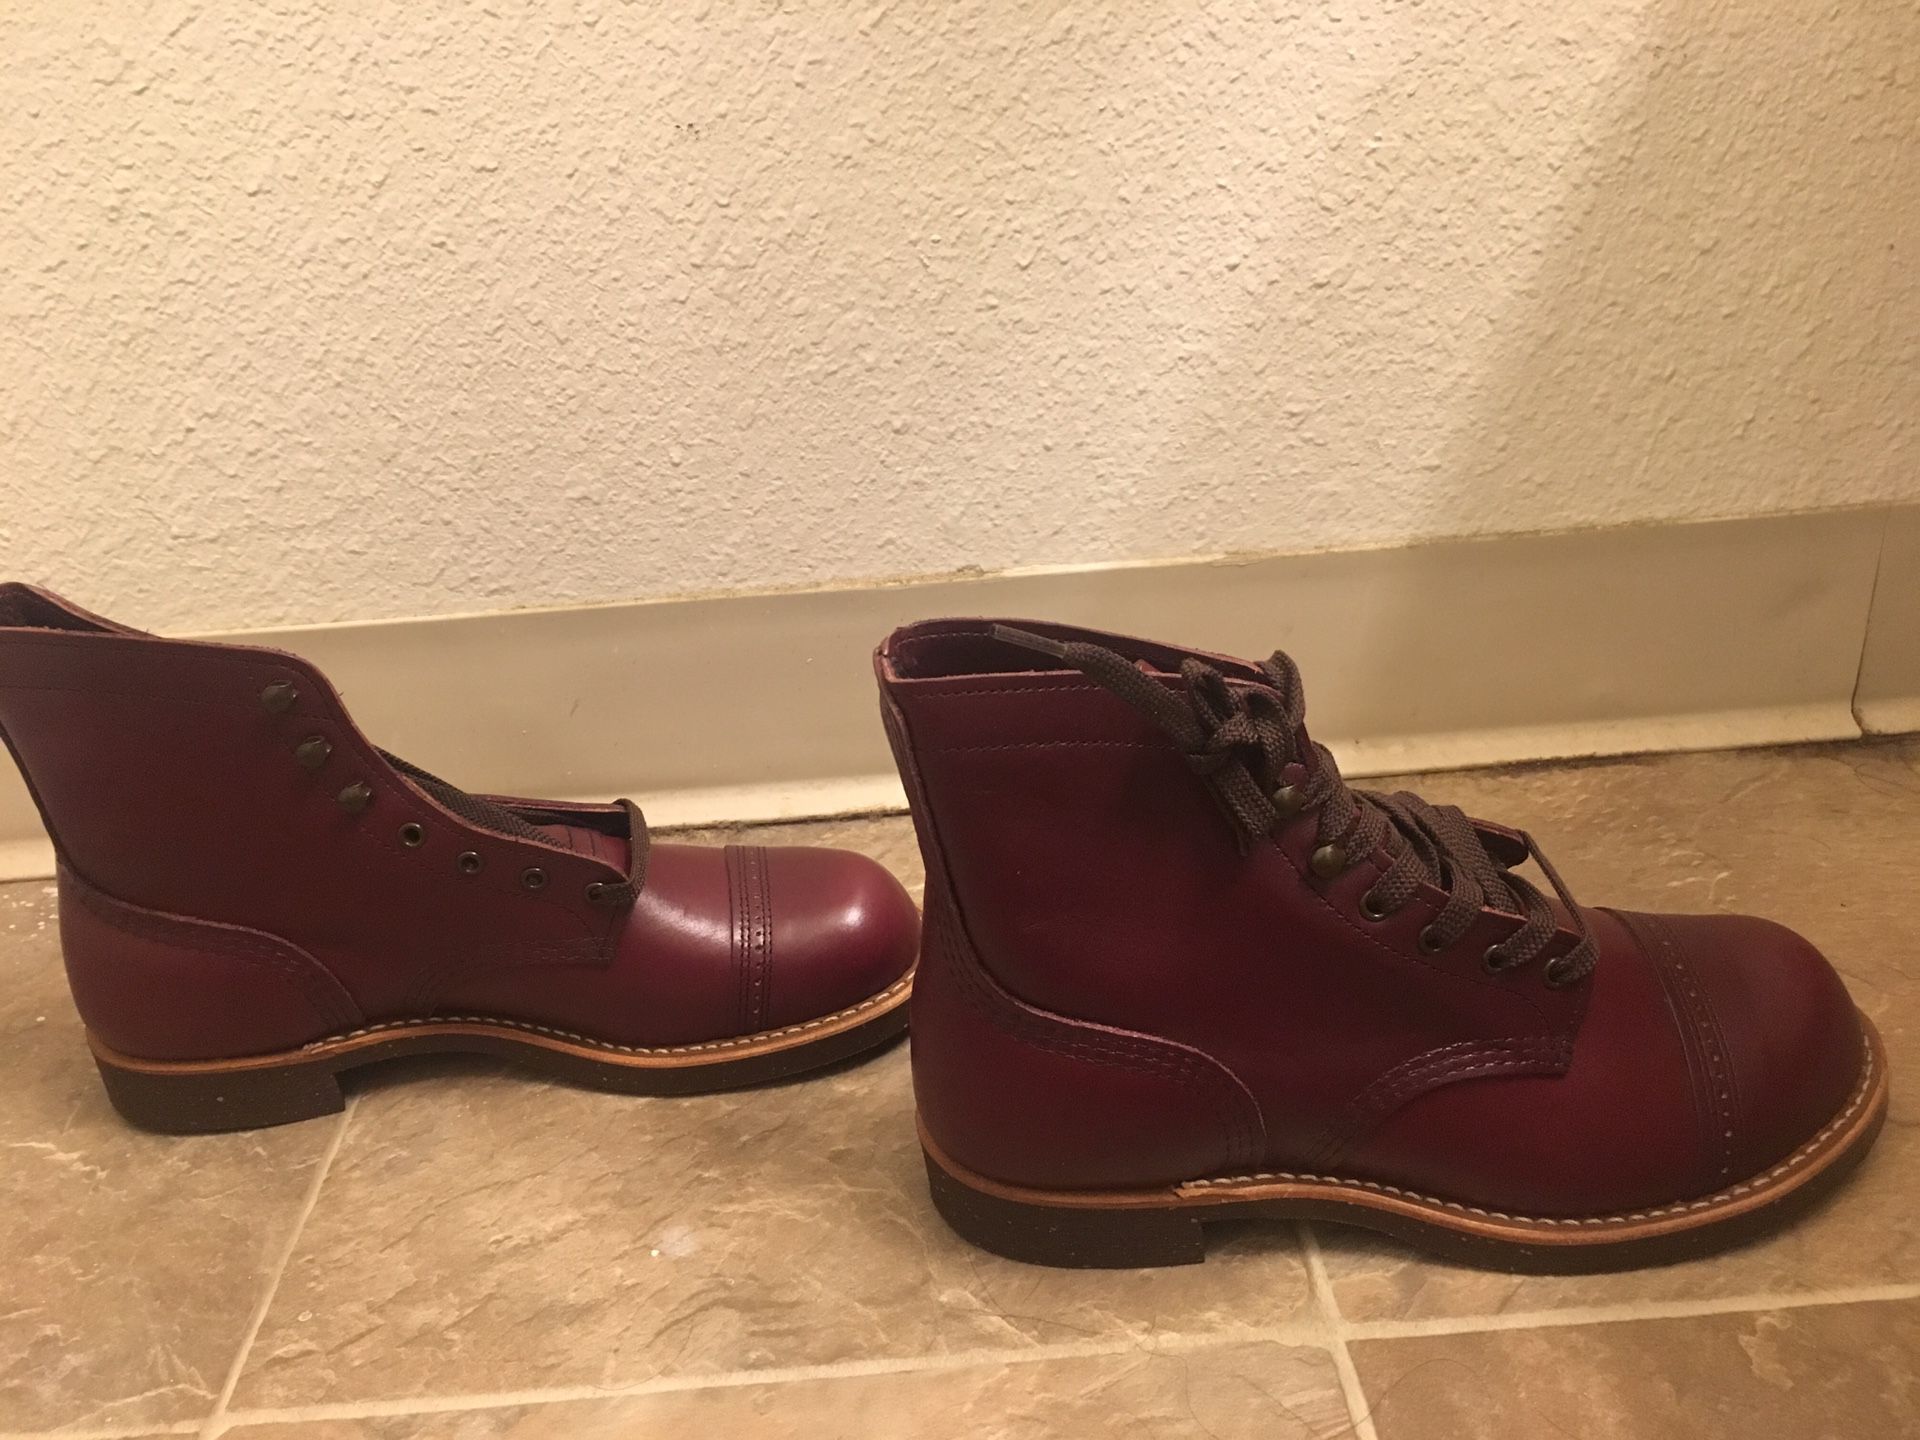 Limited Edition Red Wing Munson Ranger 8012 size 7.5 for Sale in 